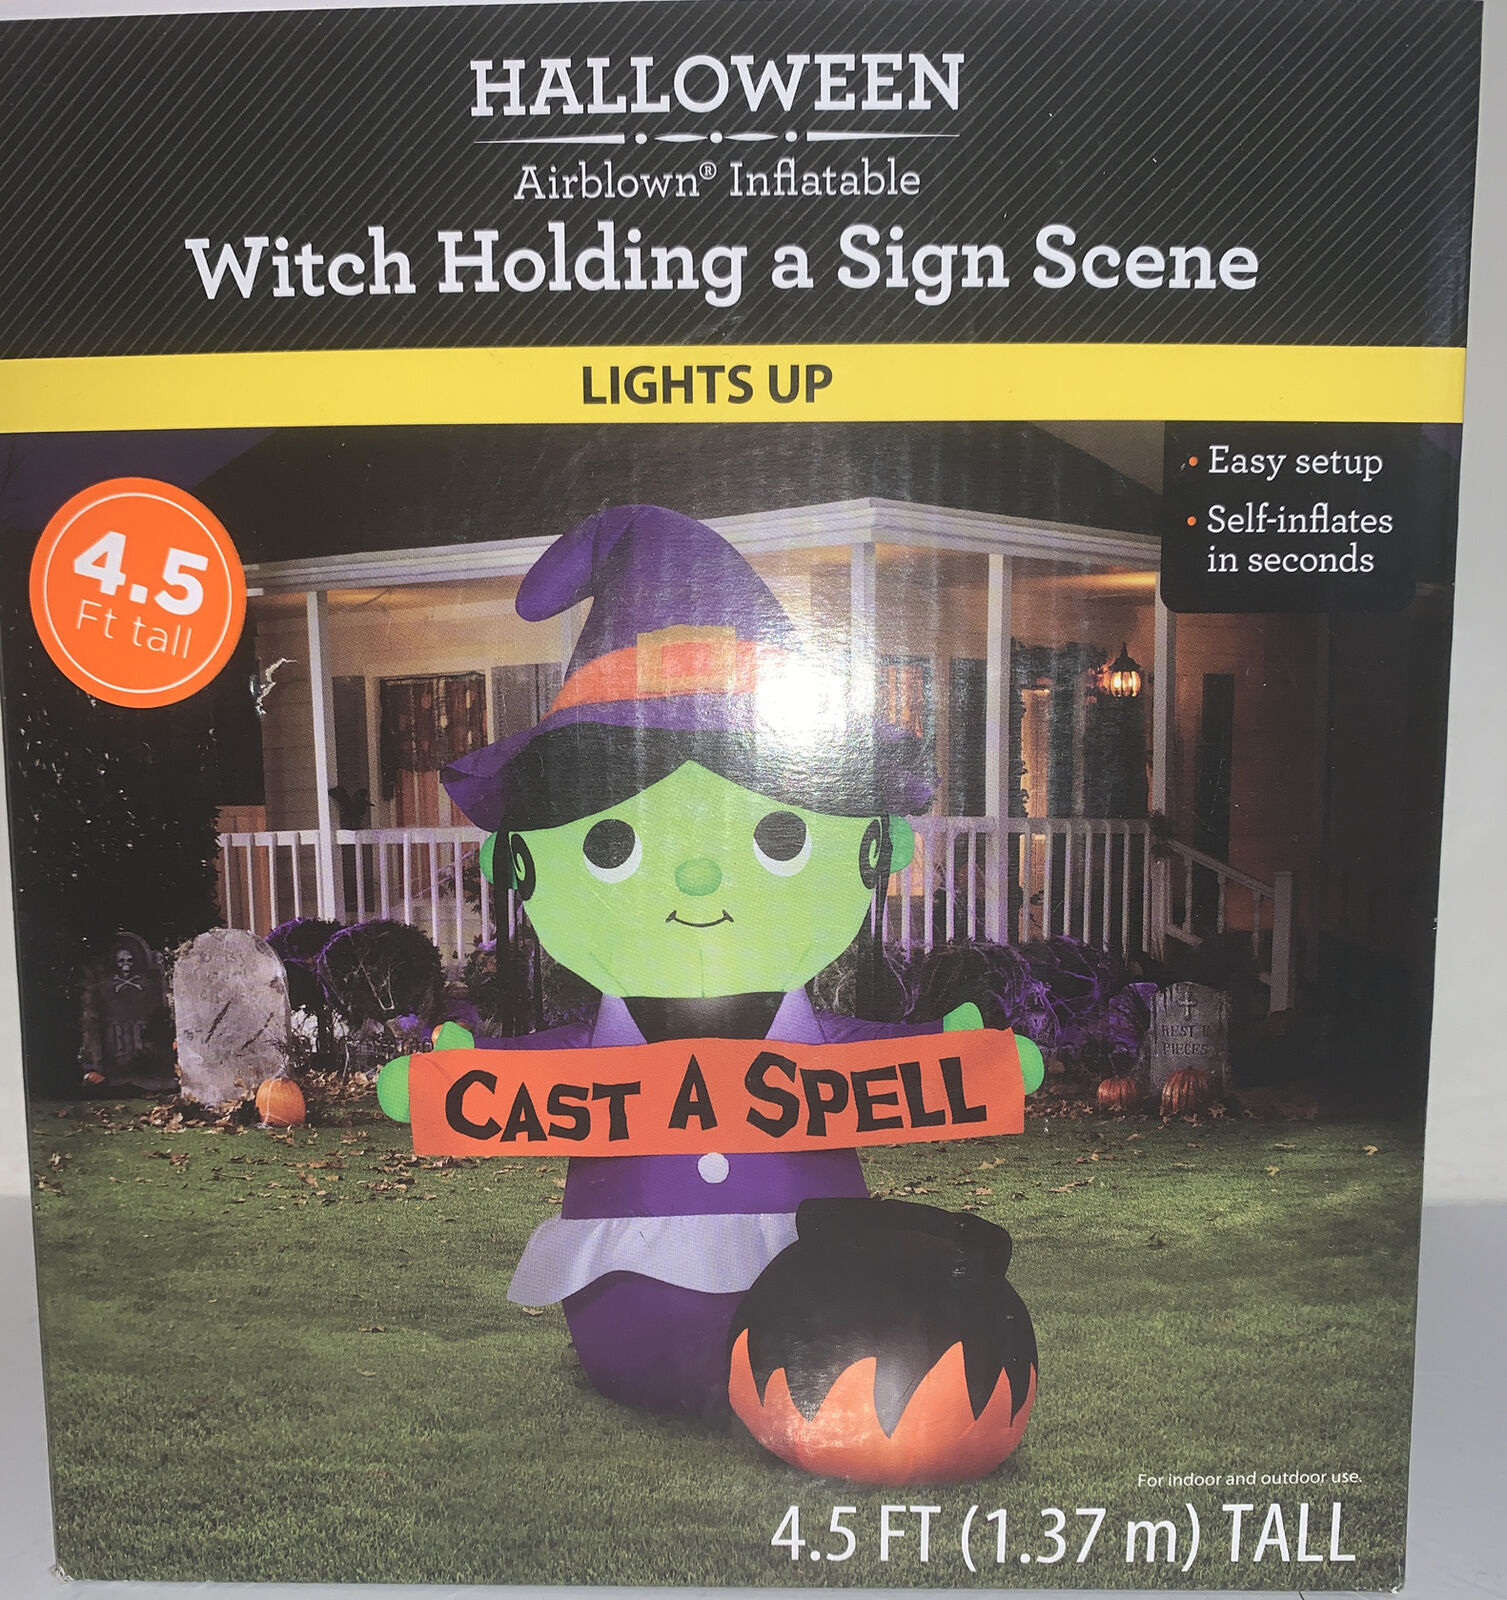 New Witch Holding A Sign Scene 4.5 Foot Tall Halloween Inflatable Cast A Spell